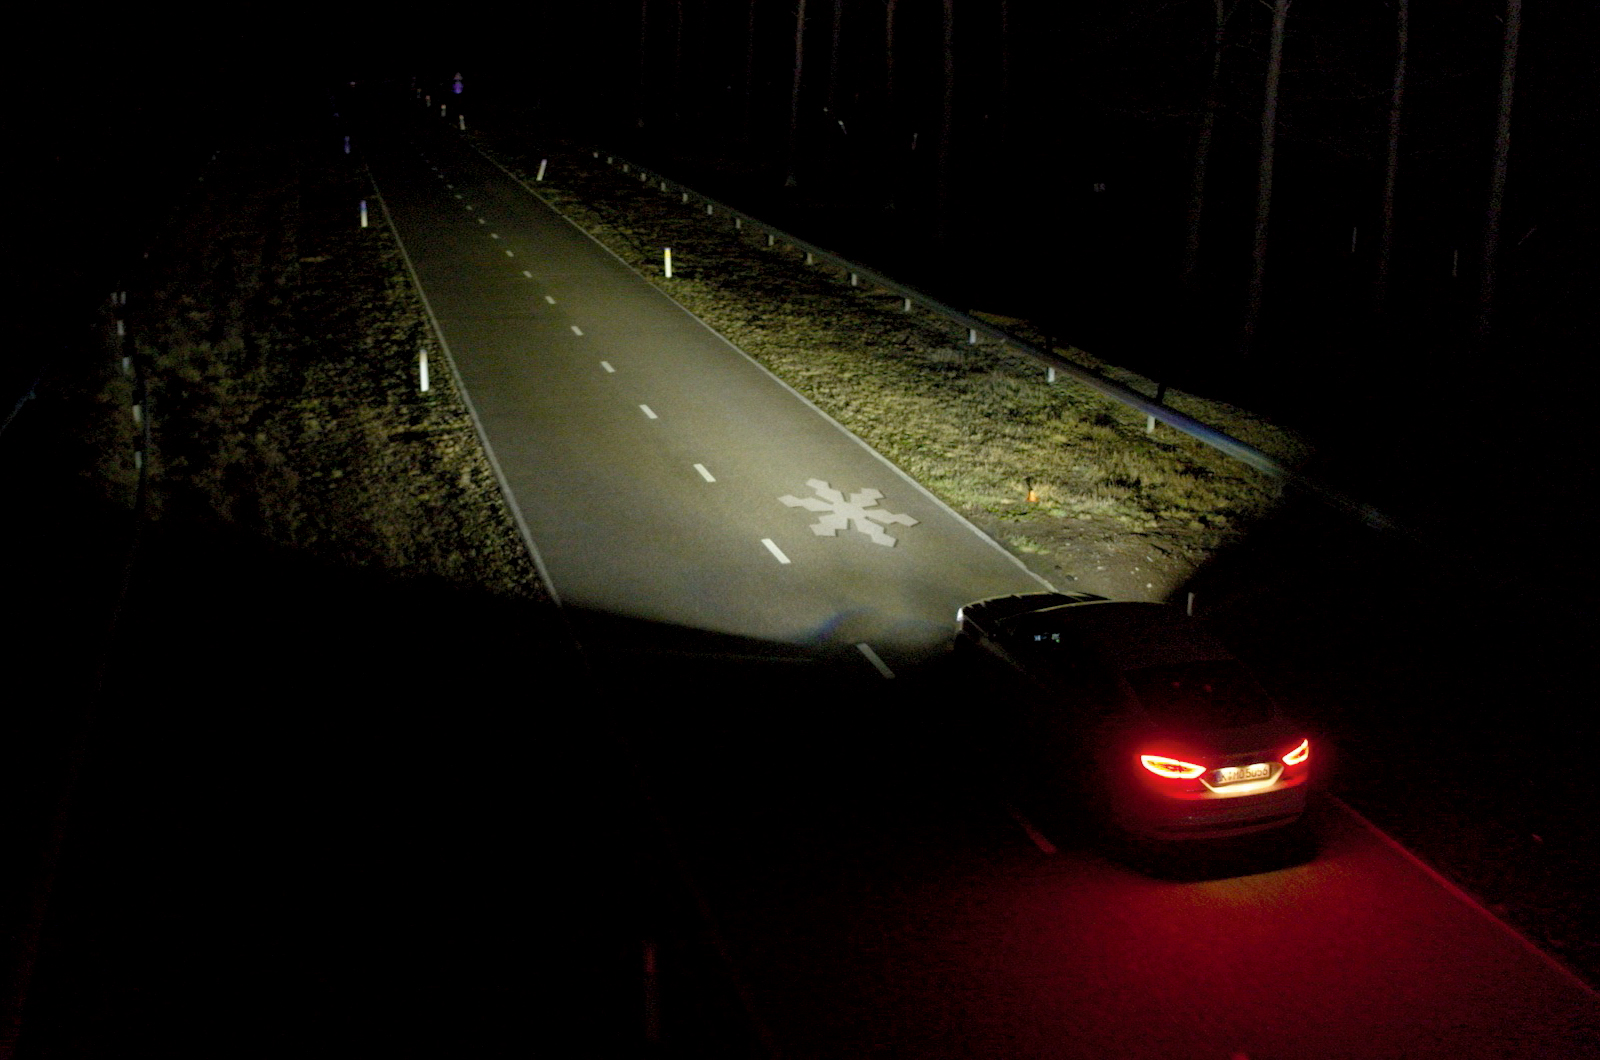 https://www.autocar.co.uk/sites/autocar.co.uk/files/images/car-reviews/first-drives/legacy/headlight-road-sign-projection.jpg